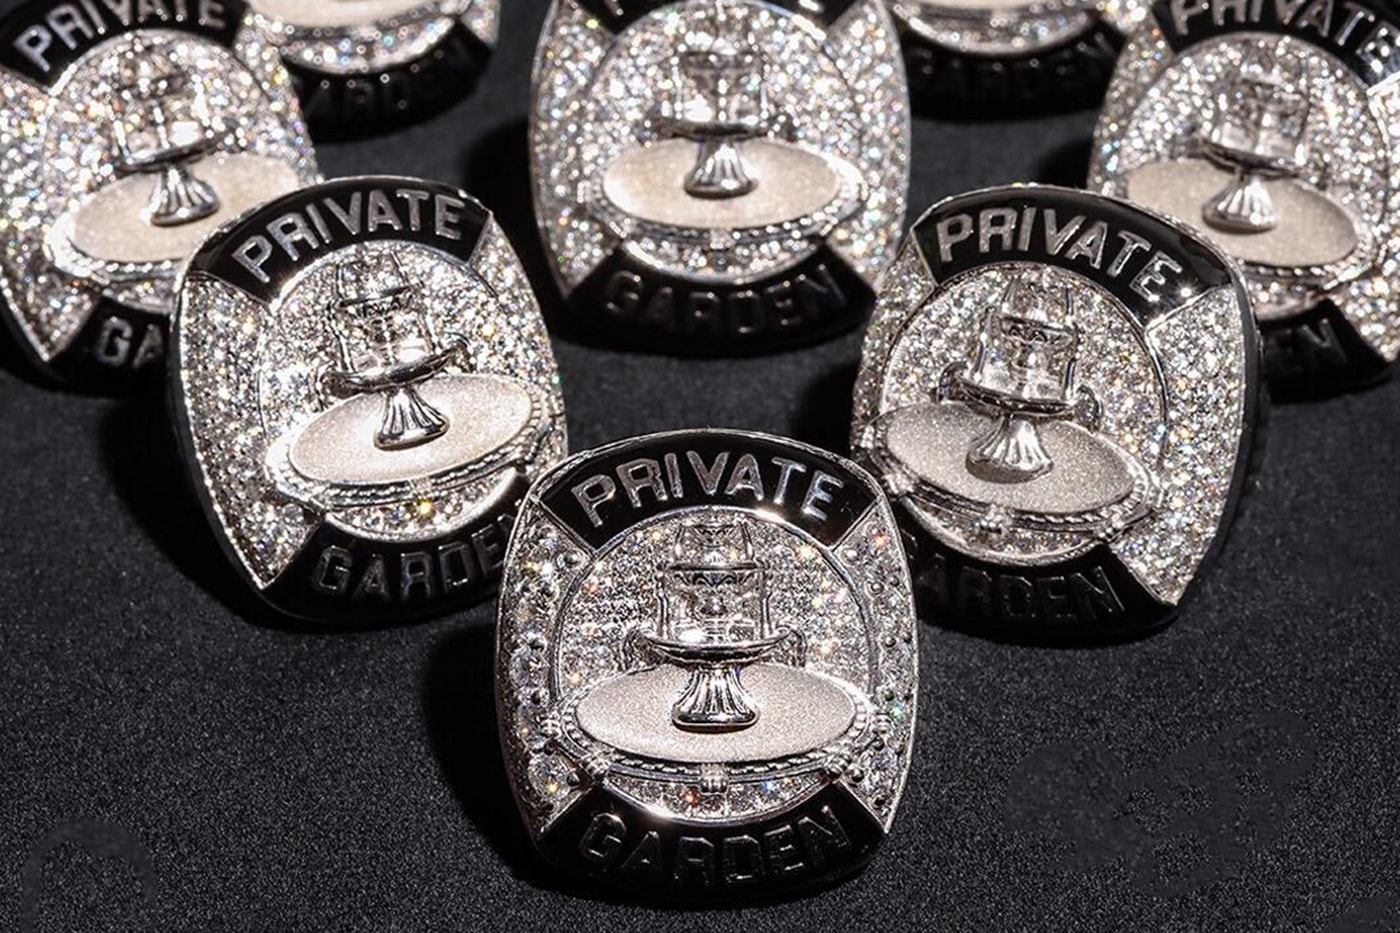 The most expensive Championship rings of all-time are full of